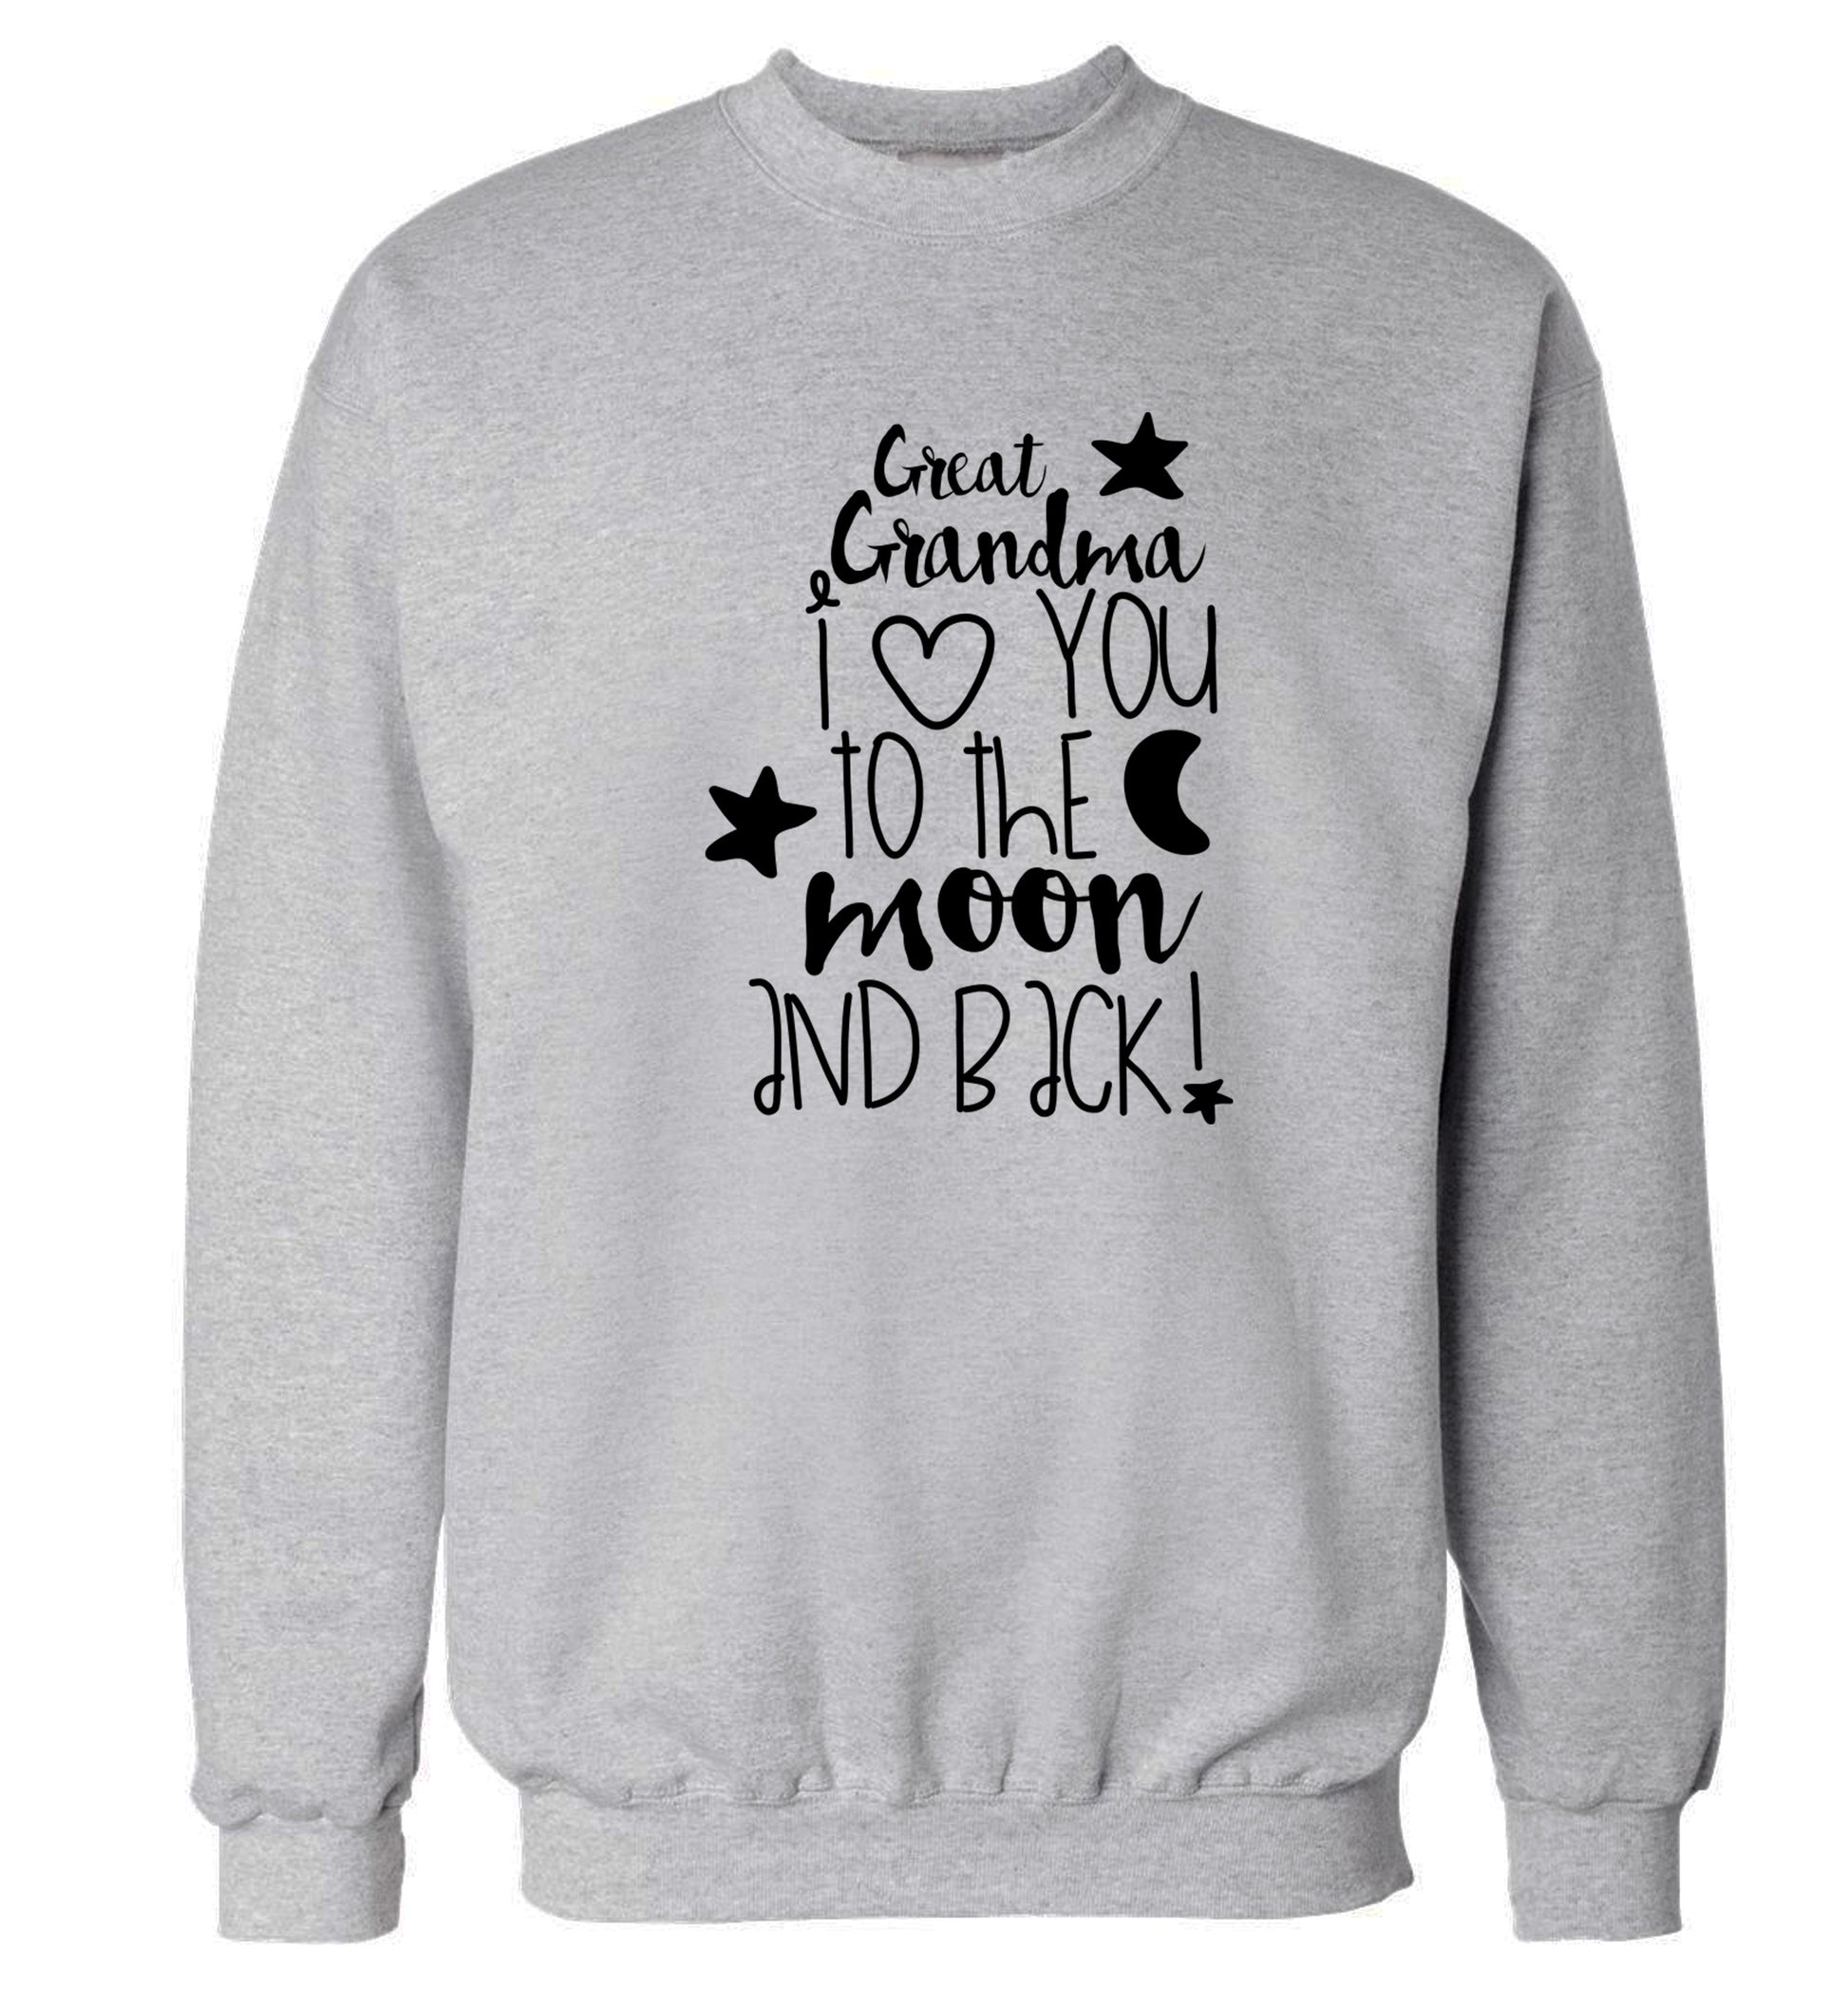 Great Grandma I love you to the moon and back Adult's unisex grey  sweater 2XL